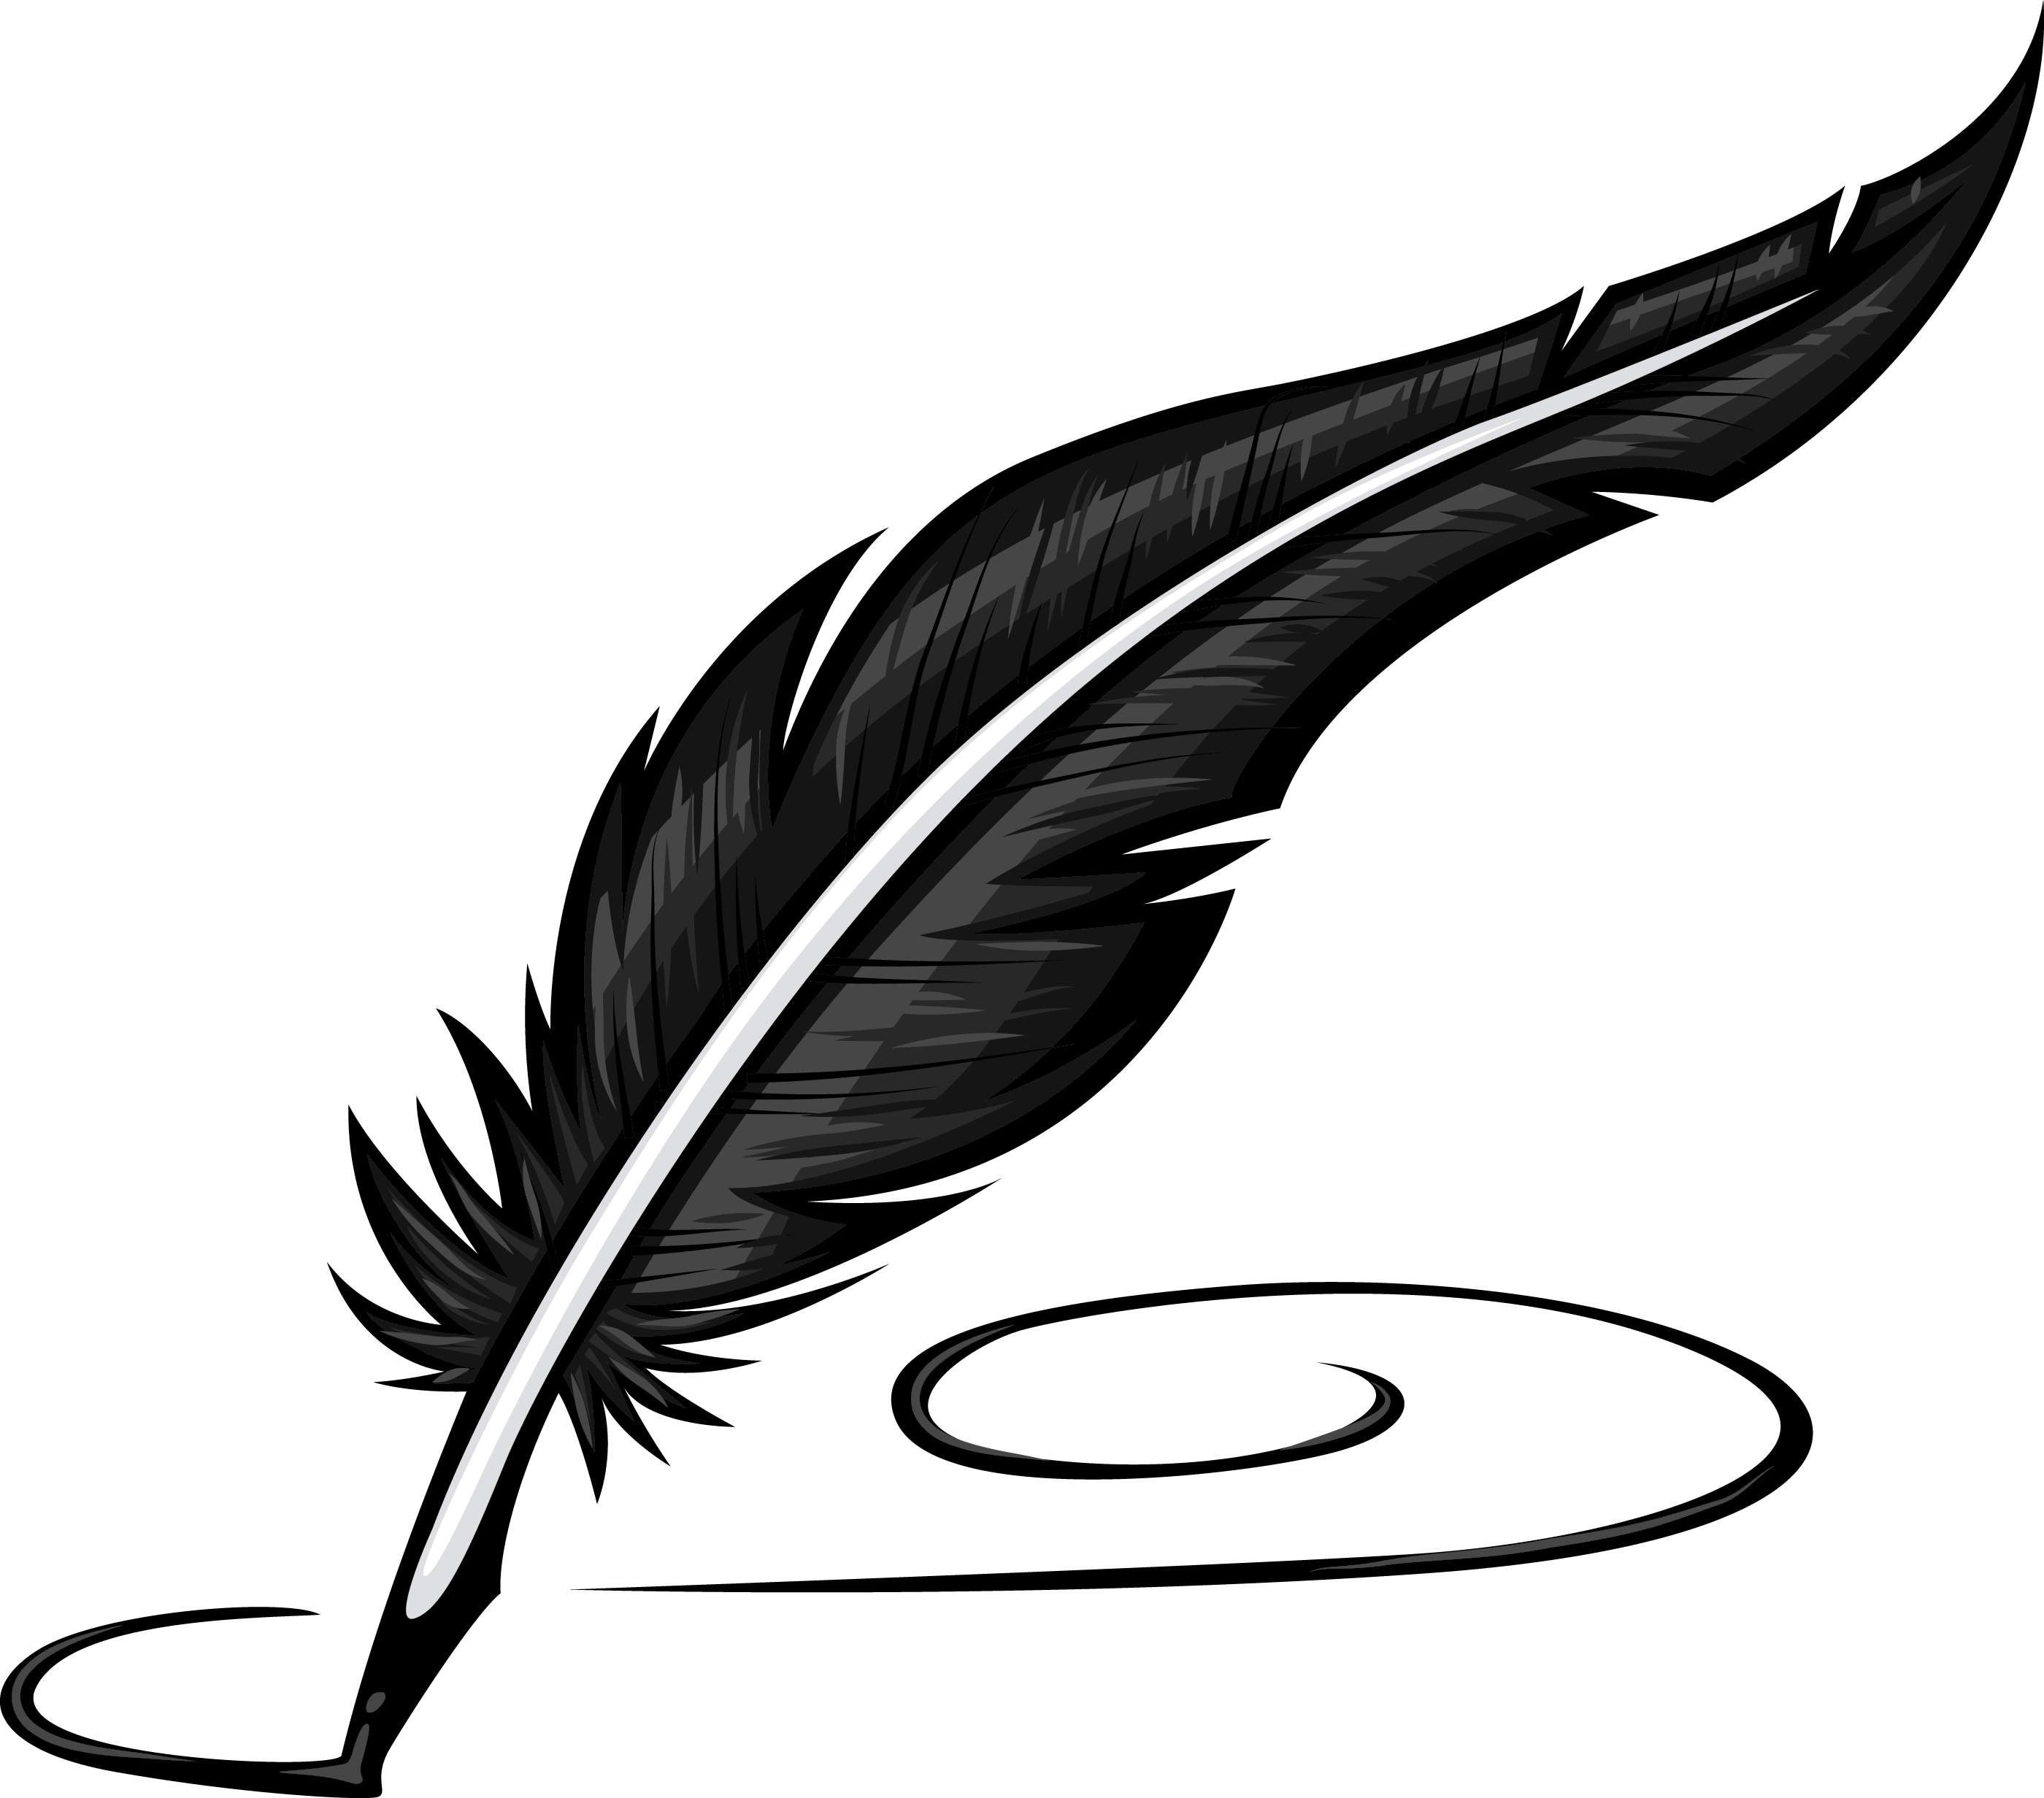 Quill And Ink Drawing, Clipart Retro Vintage Black And White Hand - Quill A...